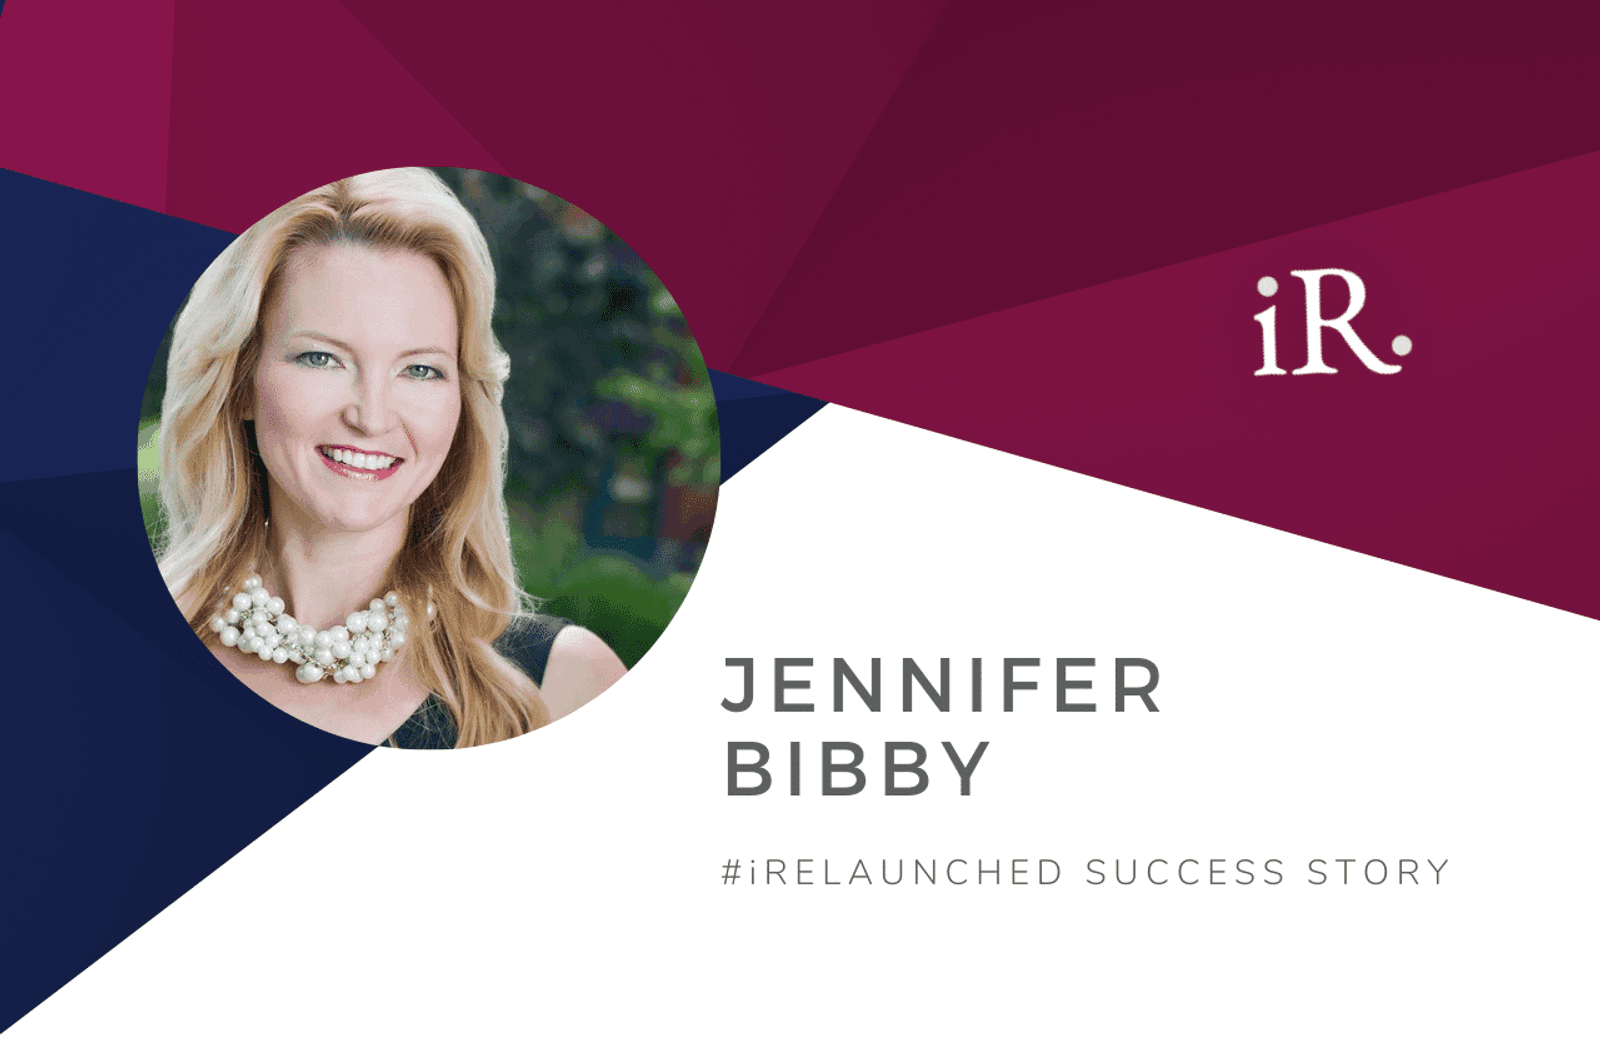 Jennifer Bibby's headshot and the text #iRelaunched Success Story along with the iRelaunch logo.  A navy and maroon geometric textured background intersect behind Jennifer's headshot.